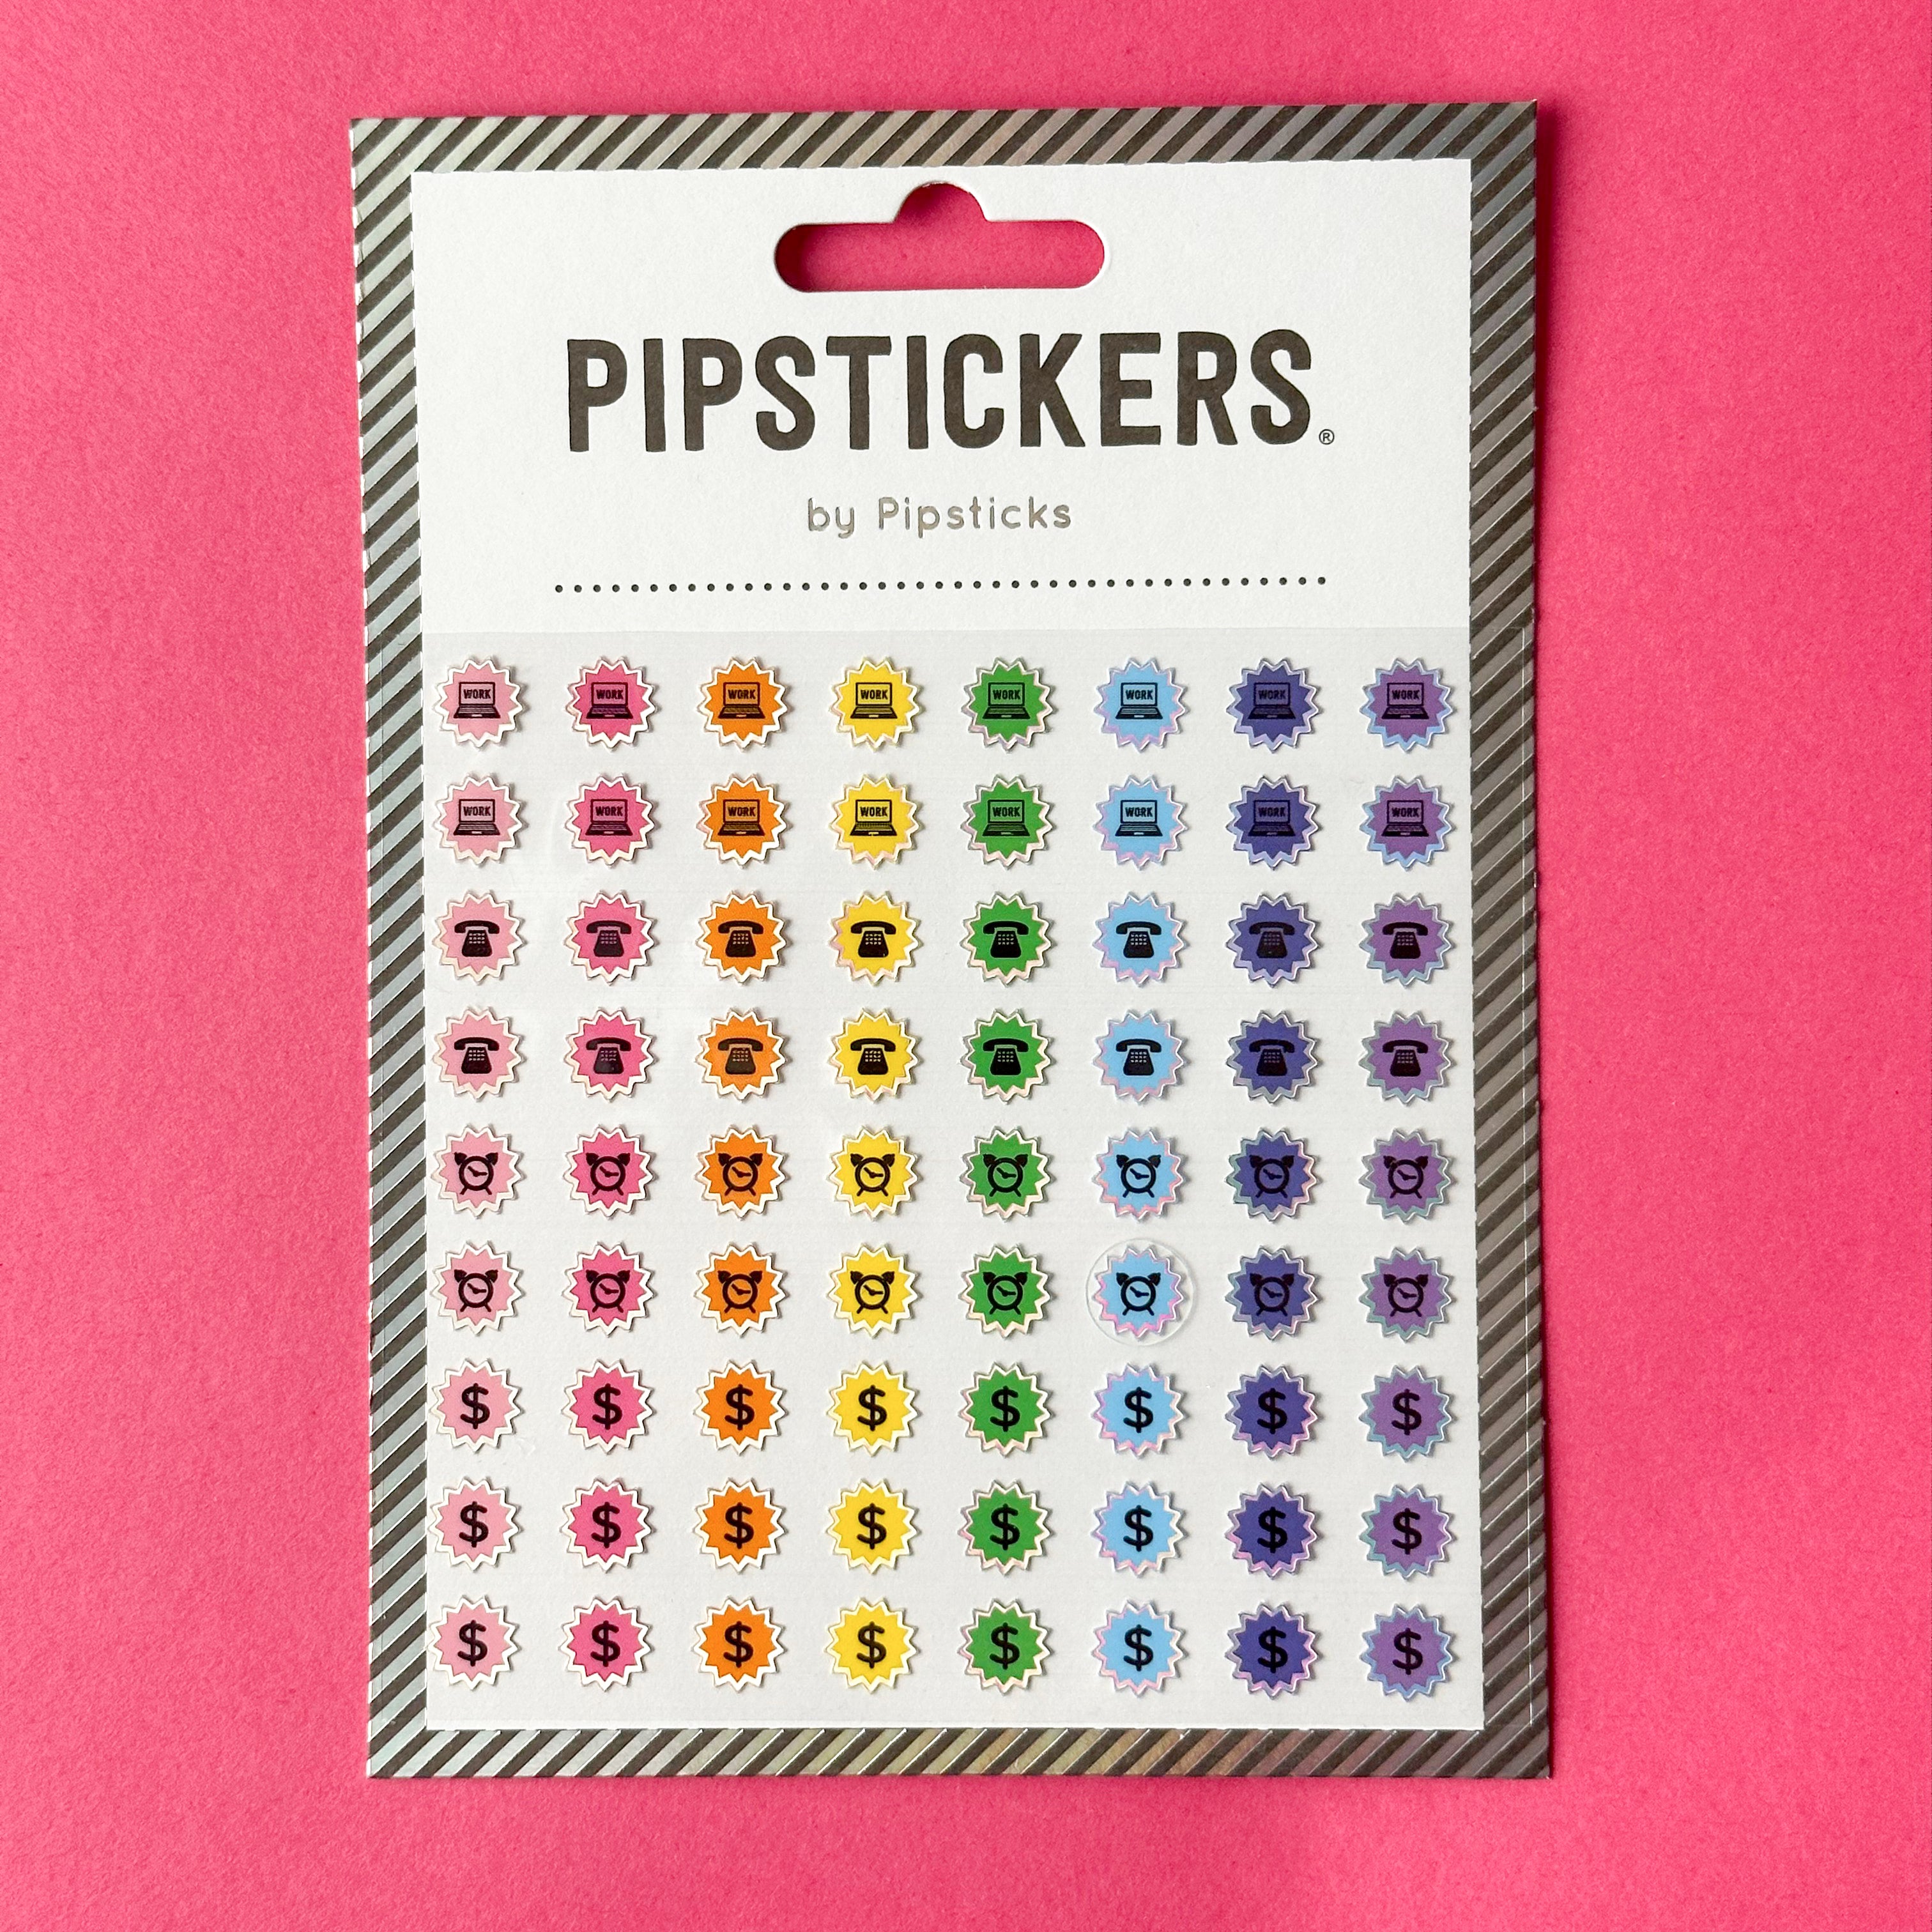 Stay organized with our small planner stickers, designed to note important dates and events, perfect for adding reminders and markers in your planner or calendar. These stickers are designed by Pipsticks and sold at BBB Supplies CRAFT SHOP.